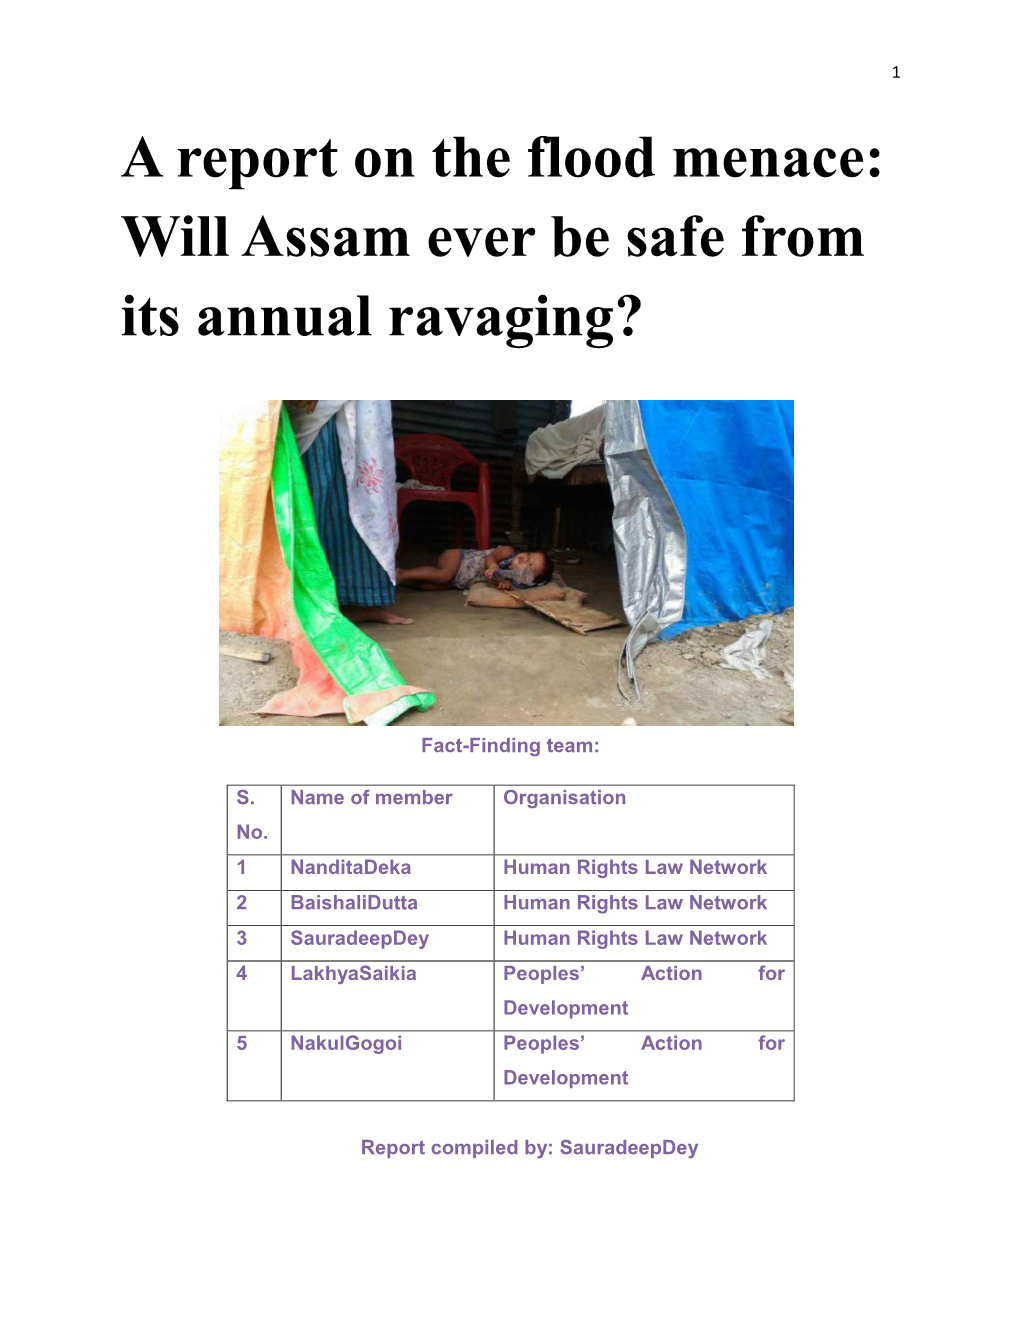 A Report on the Flood Menace: Will Assam Ever Be Safe from Its Annual Ravaging?